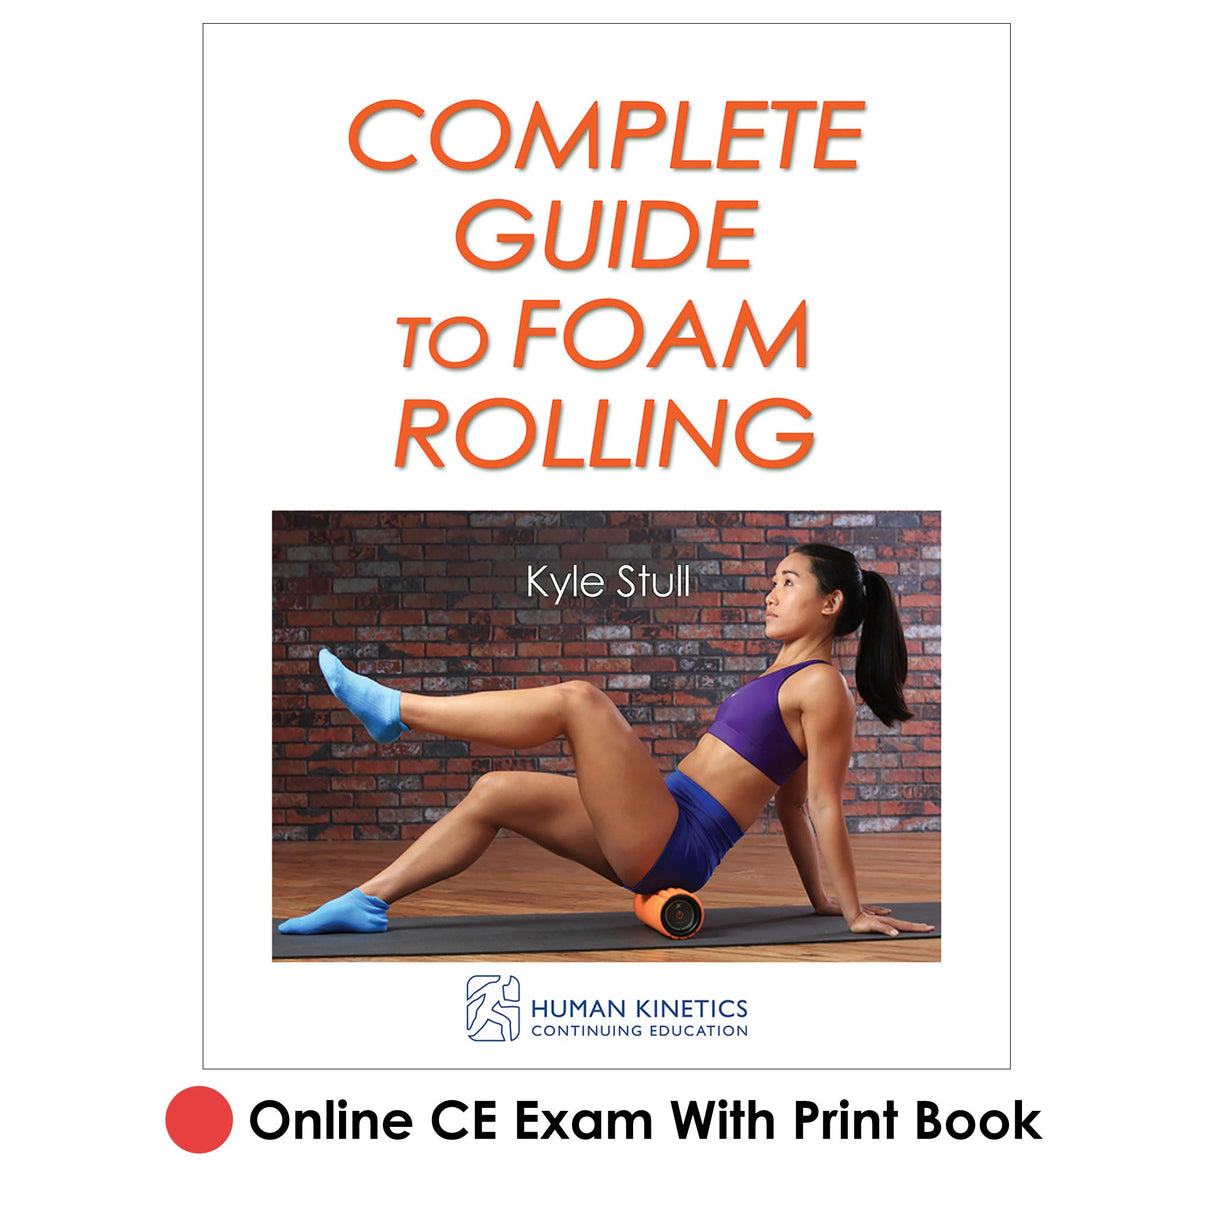 Complete Guide to Foam Rolling Online CE Exam With Print Book